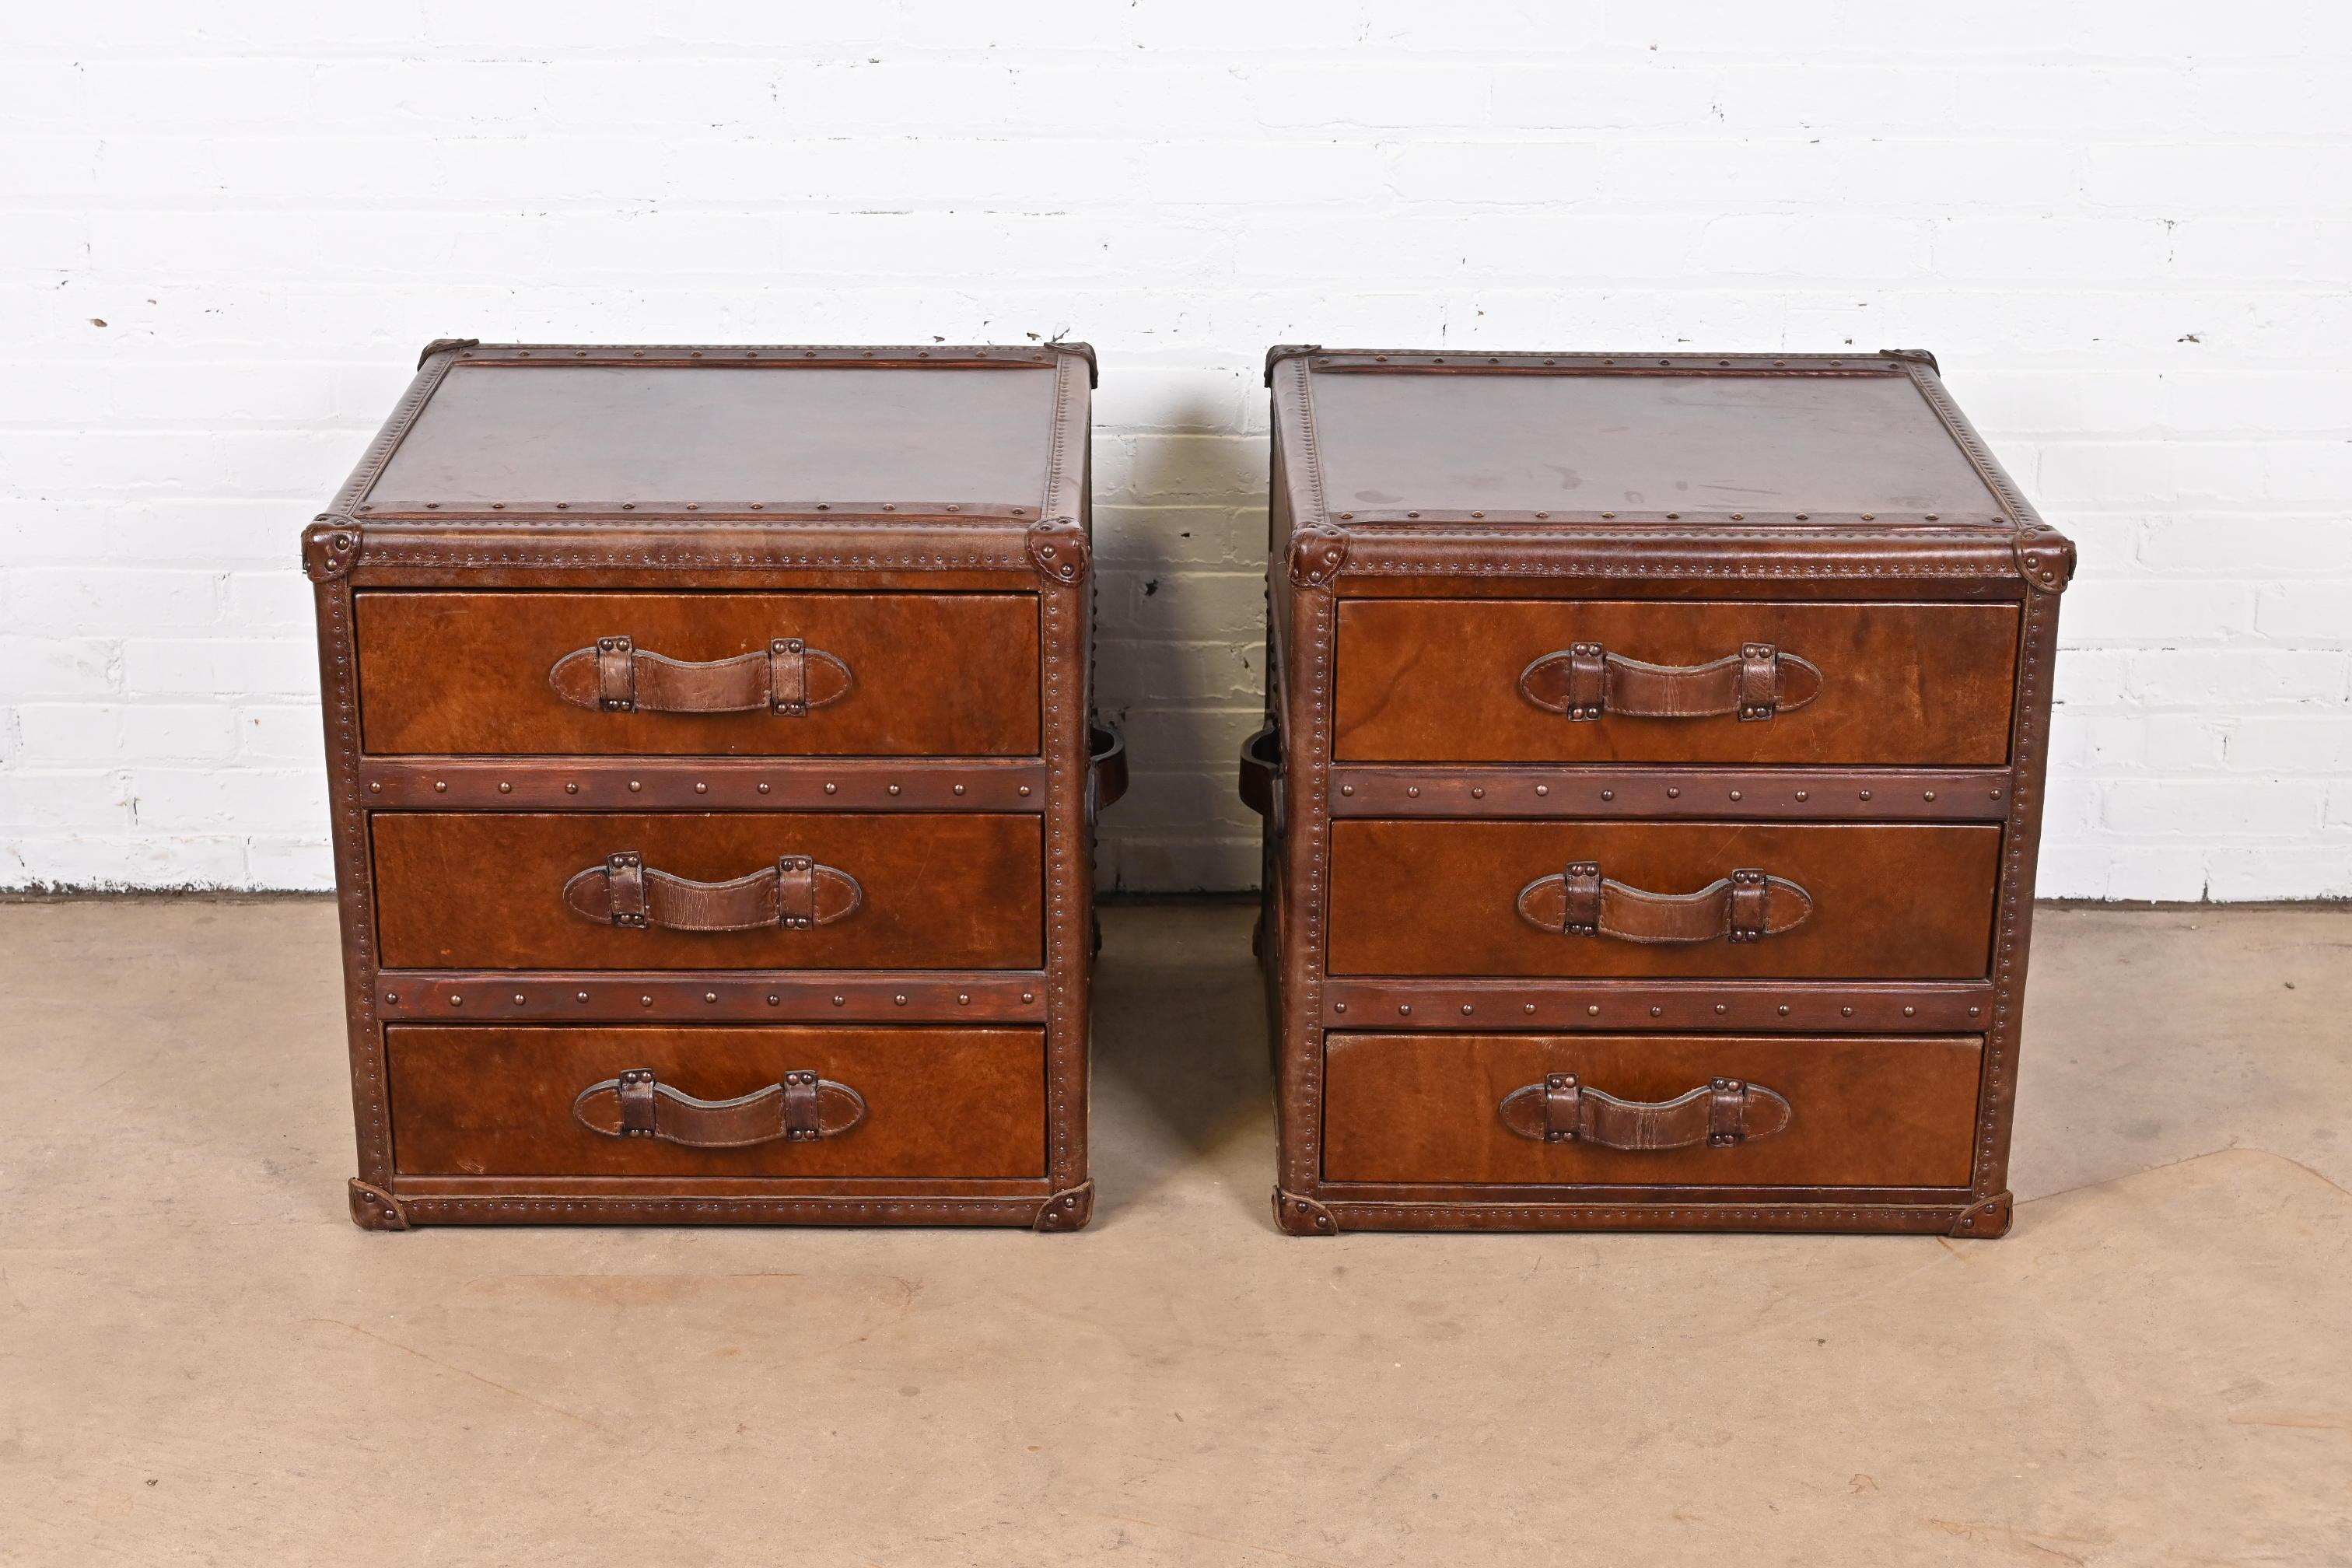 A gorgeous pair of leather wrapped trunk form nightstands or end tables

In the manner of Ralph Lauren

Circa Late 20th Century

Measures: 23.5